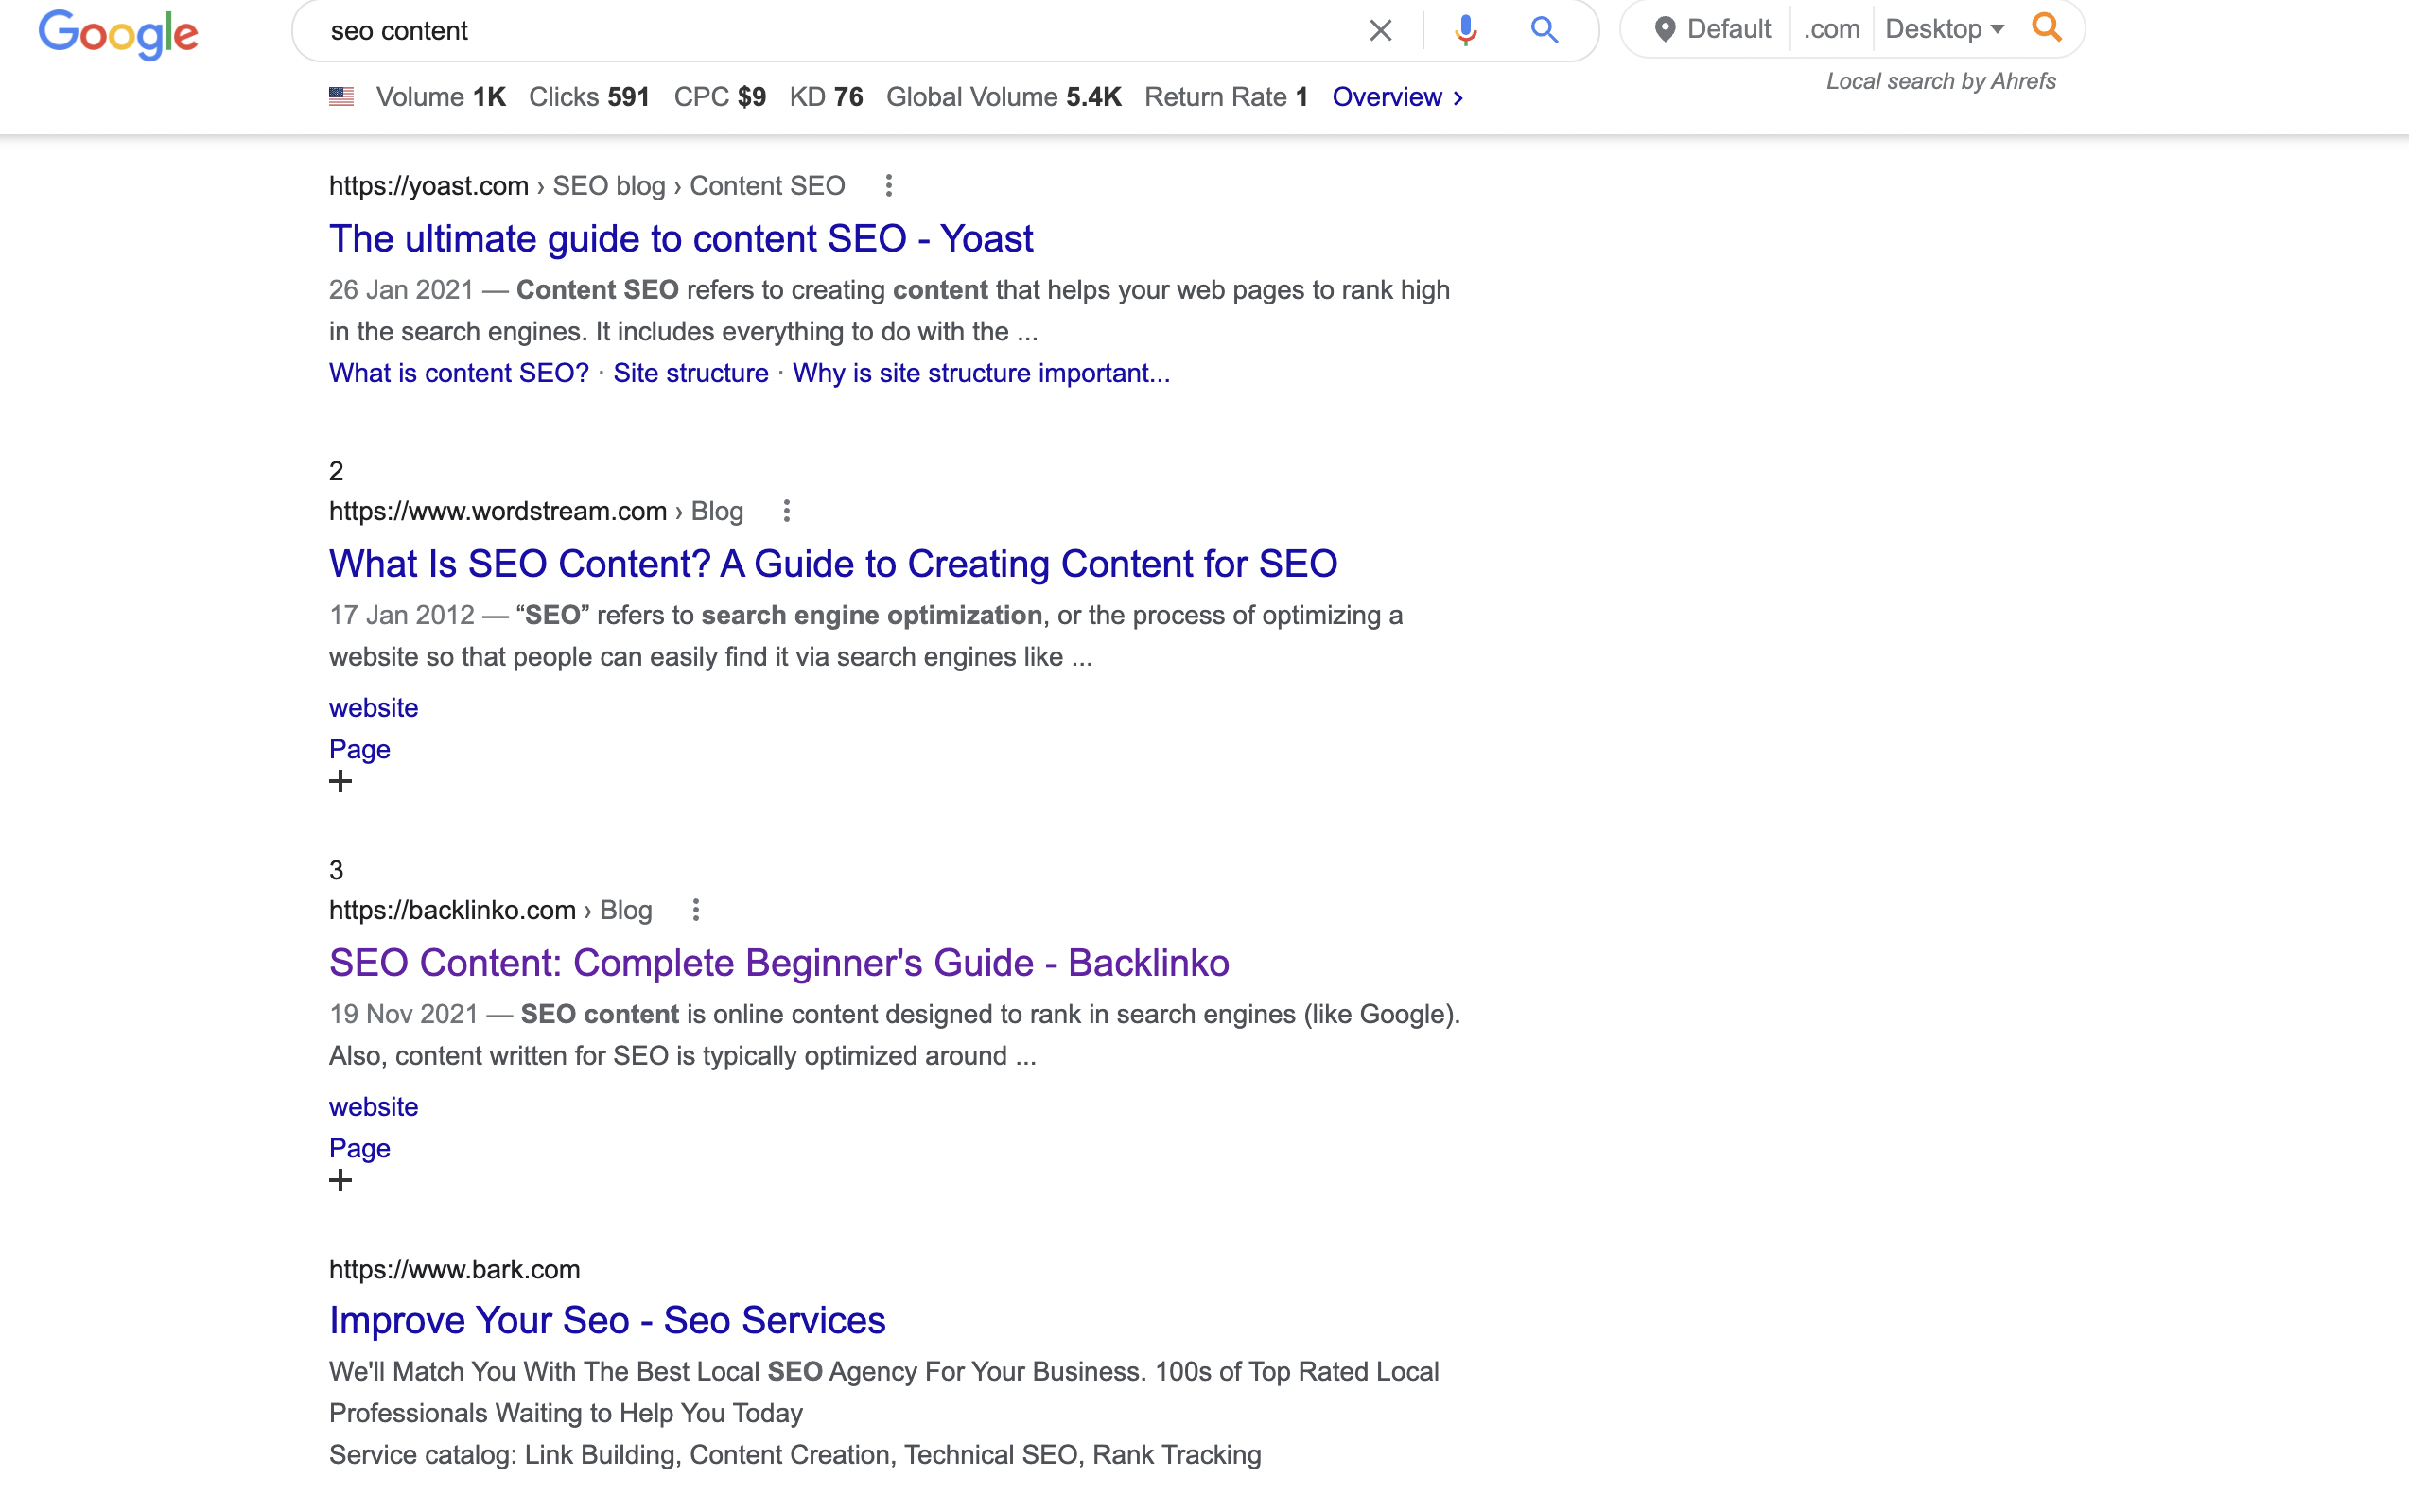 Using Google to search for "SEO content" to analyze search intent.